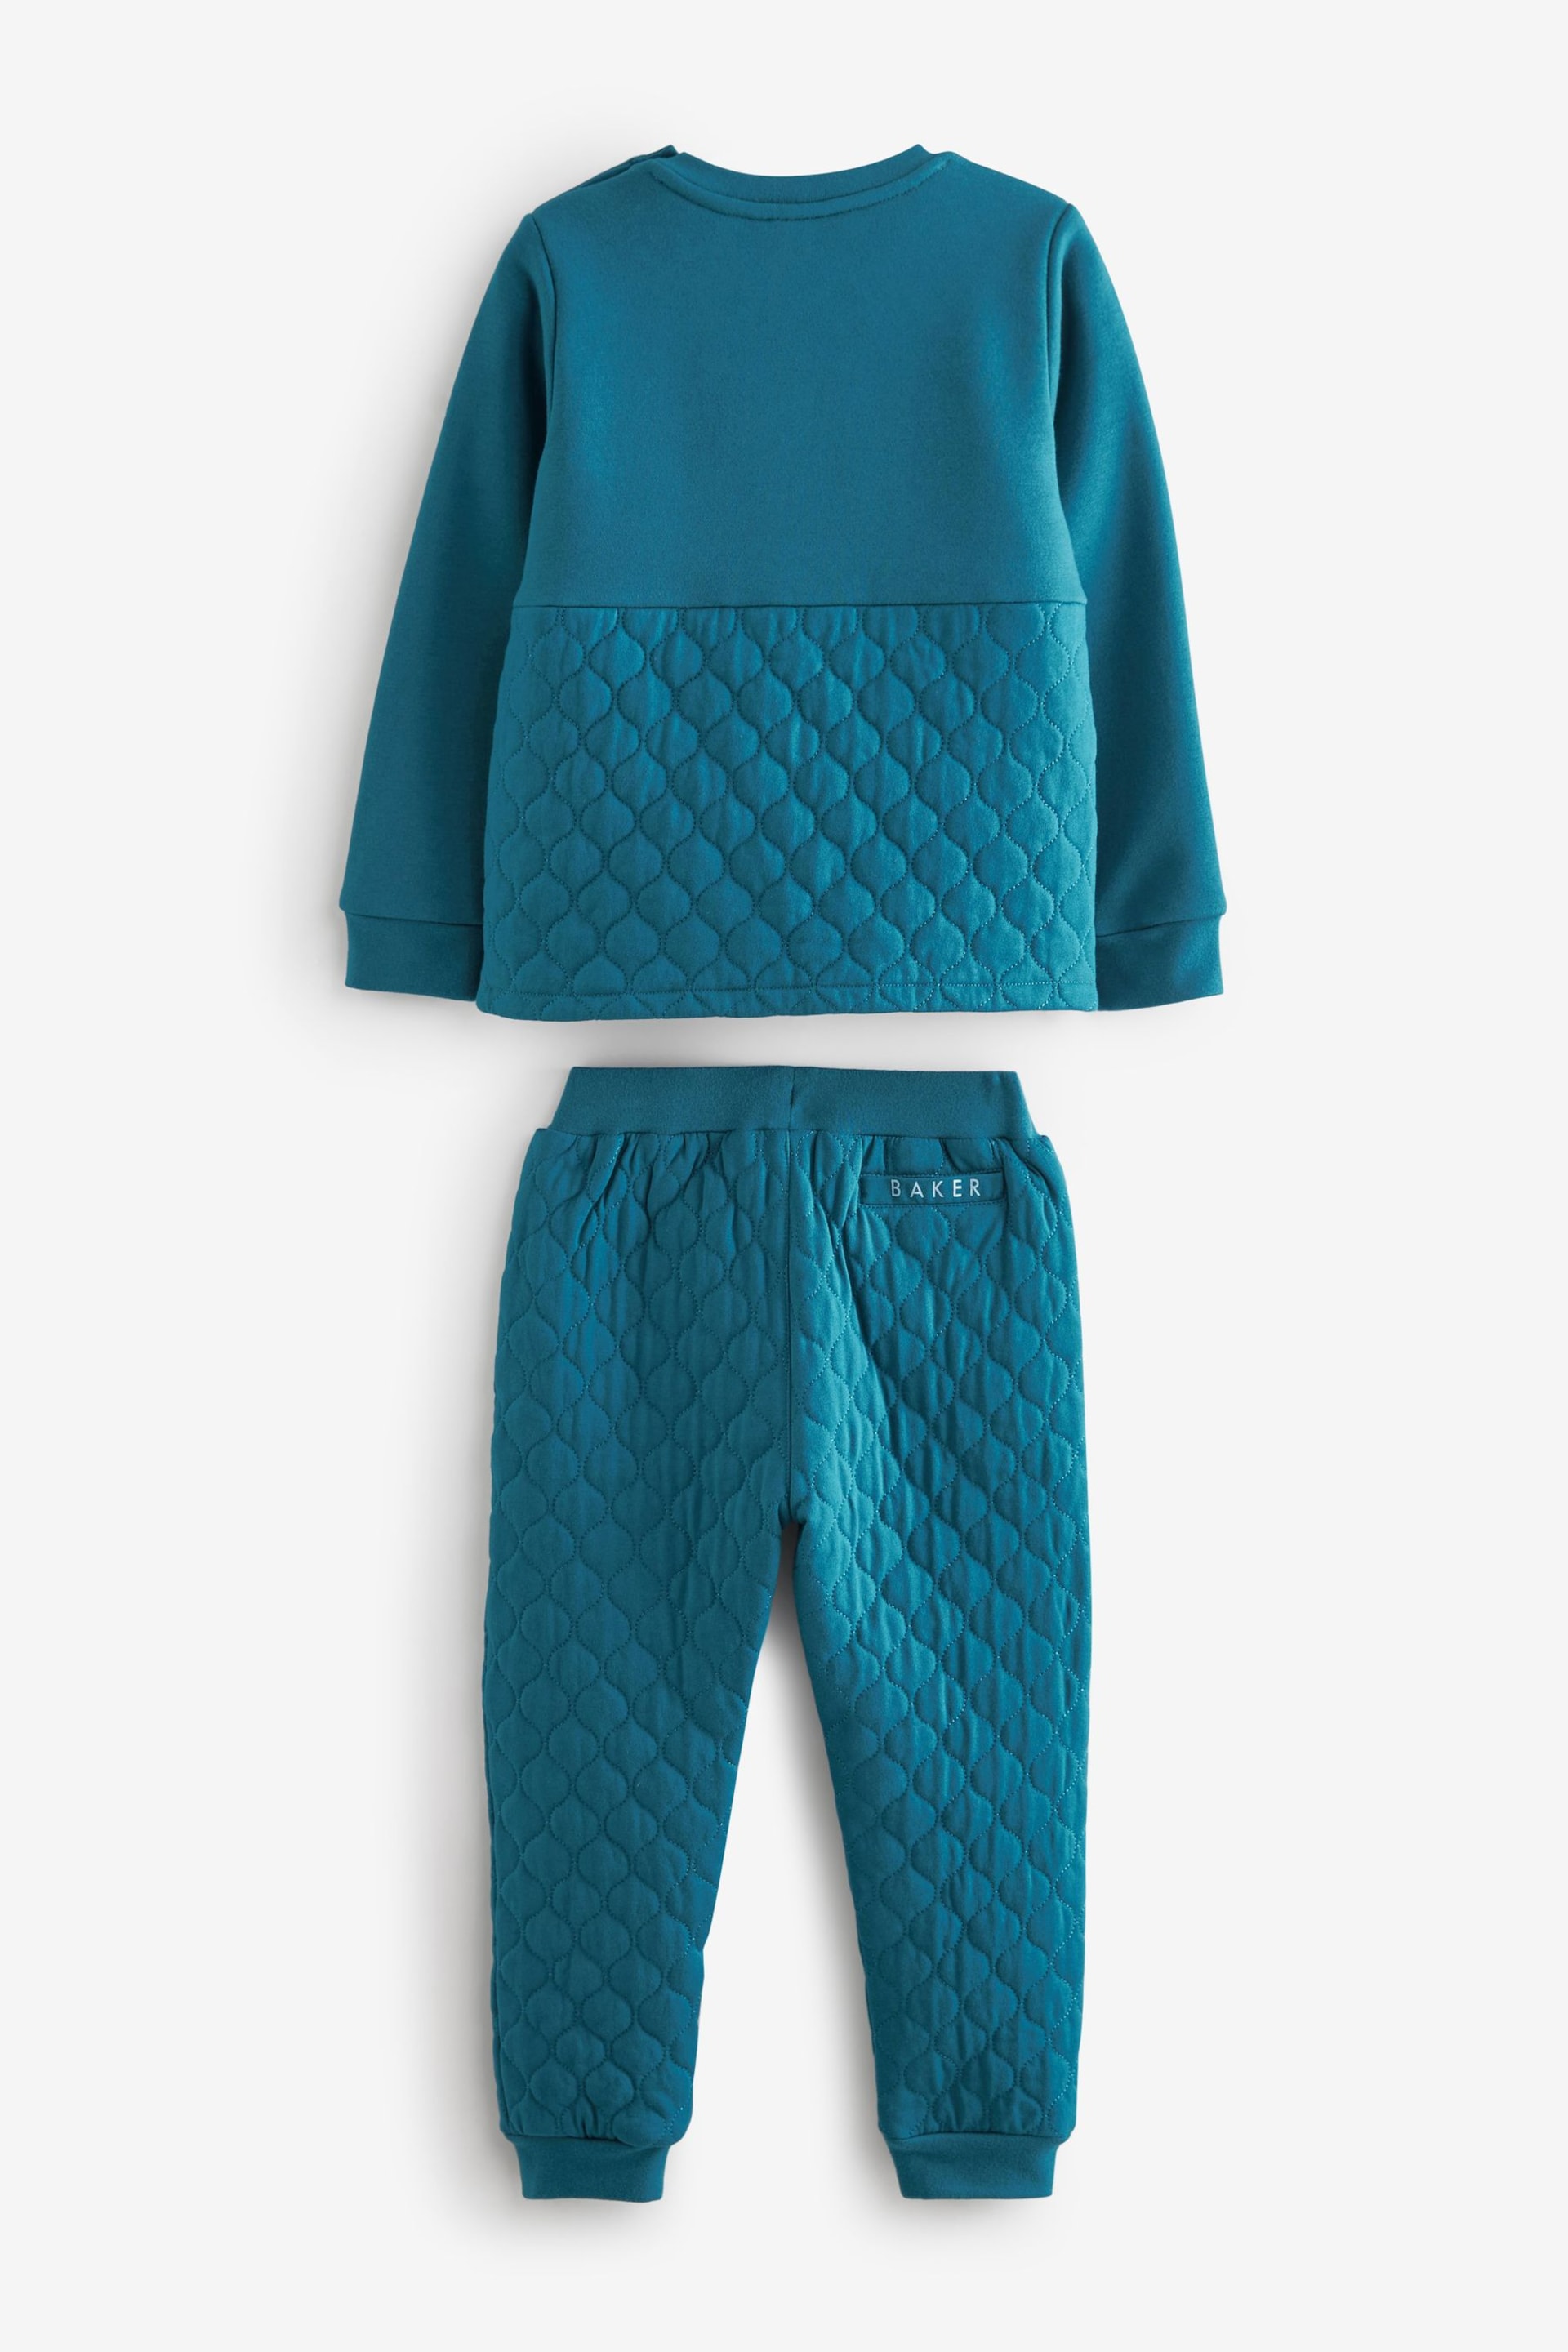 Baker by Ted Baker (0-6yrs) Quilted Sweater and Jogger Set - Image 10 of 13